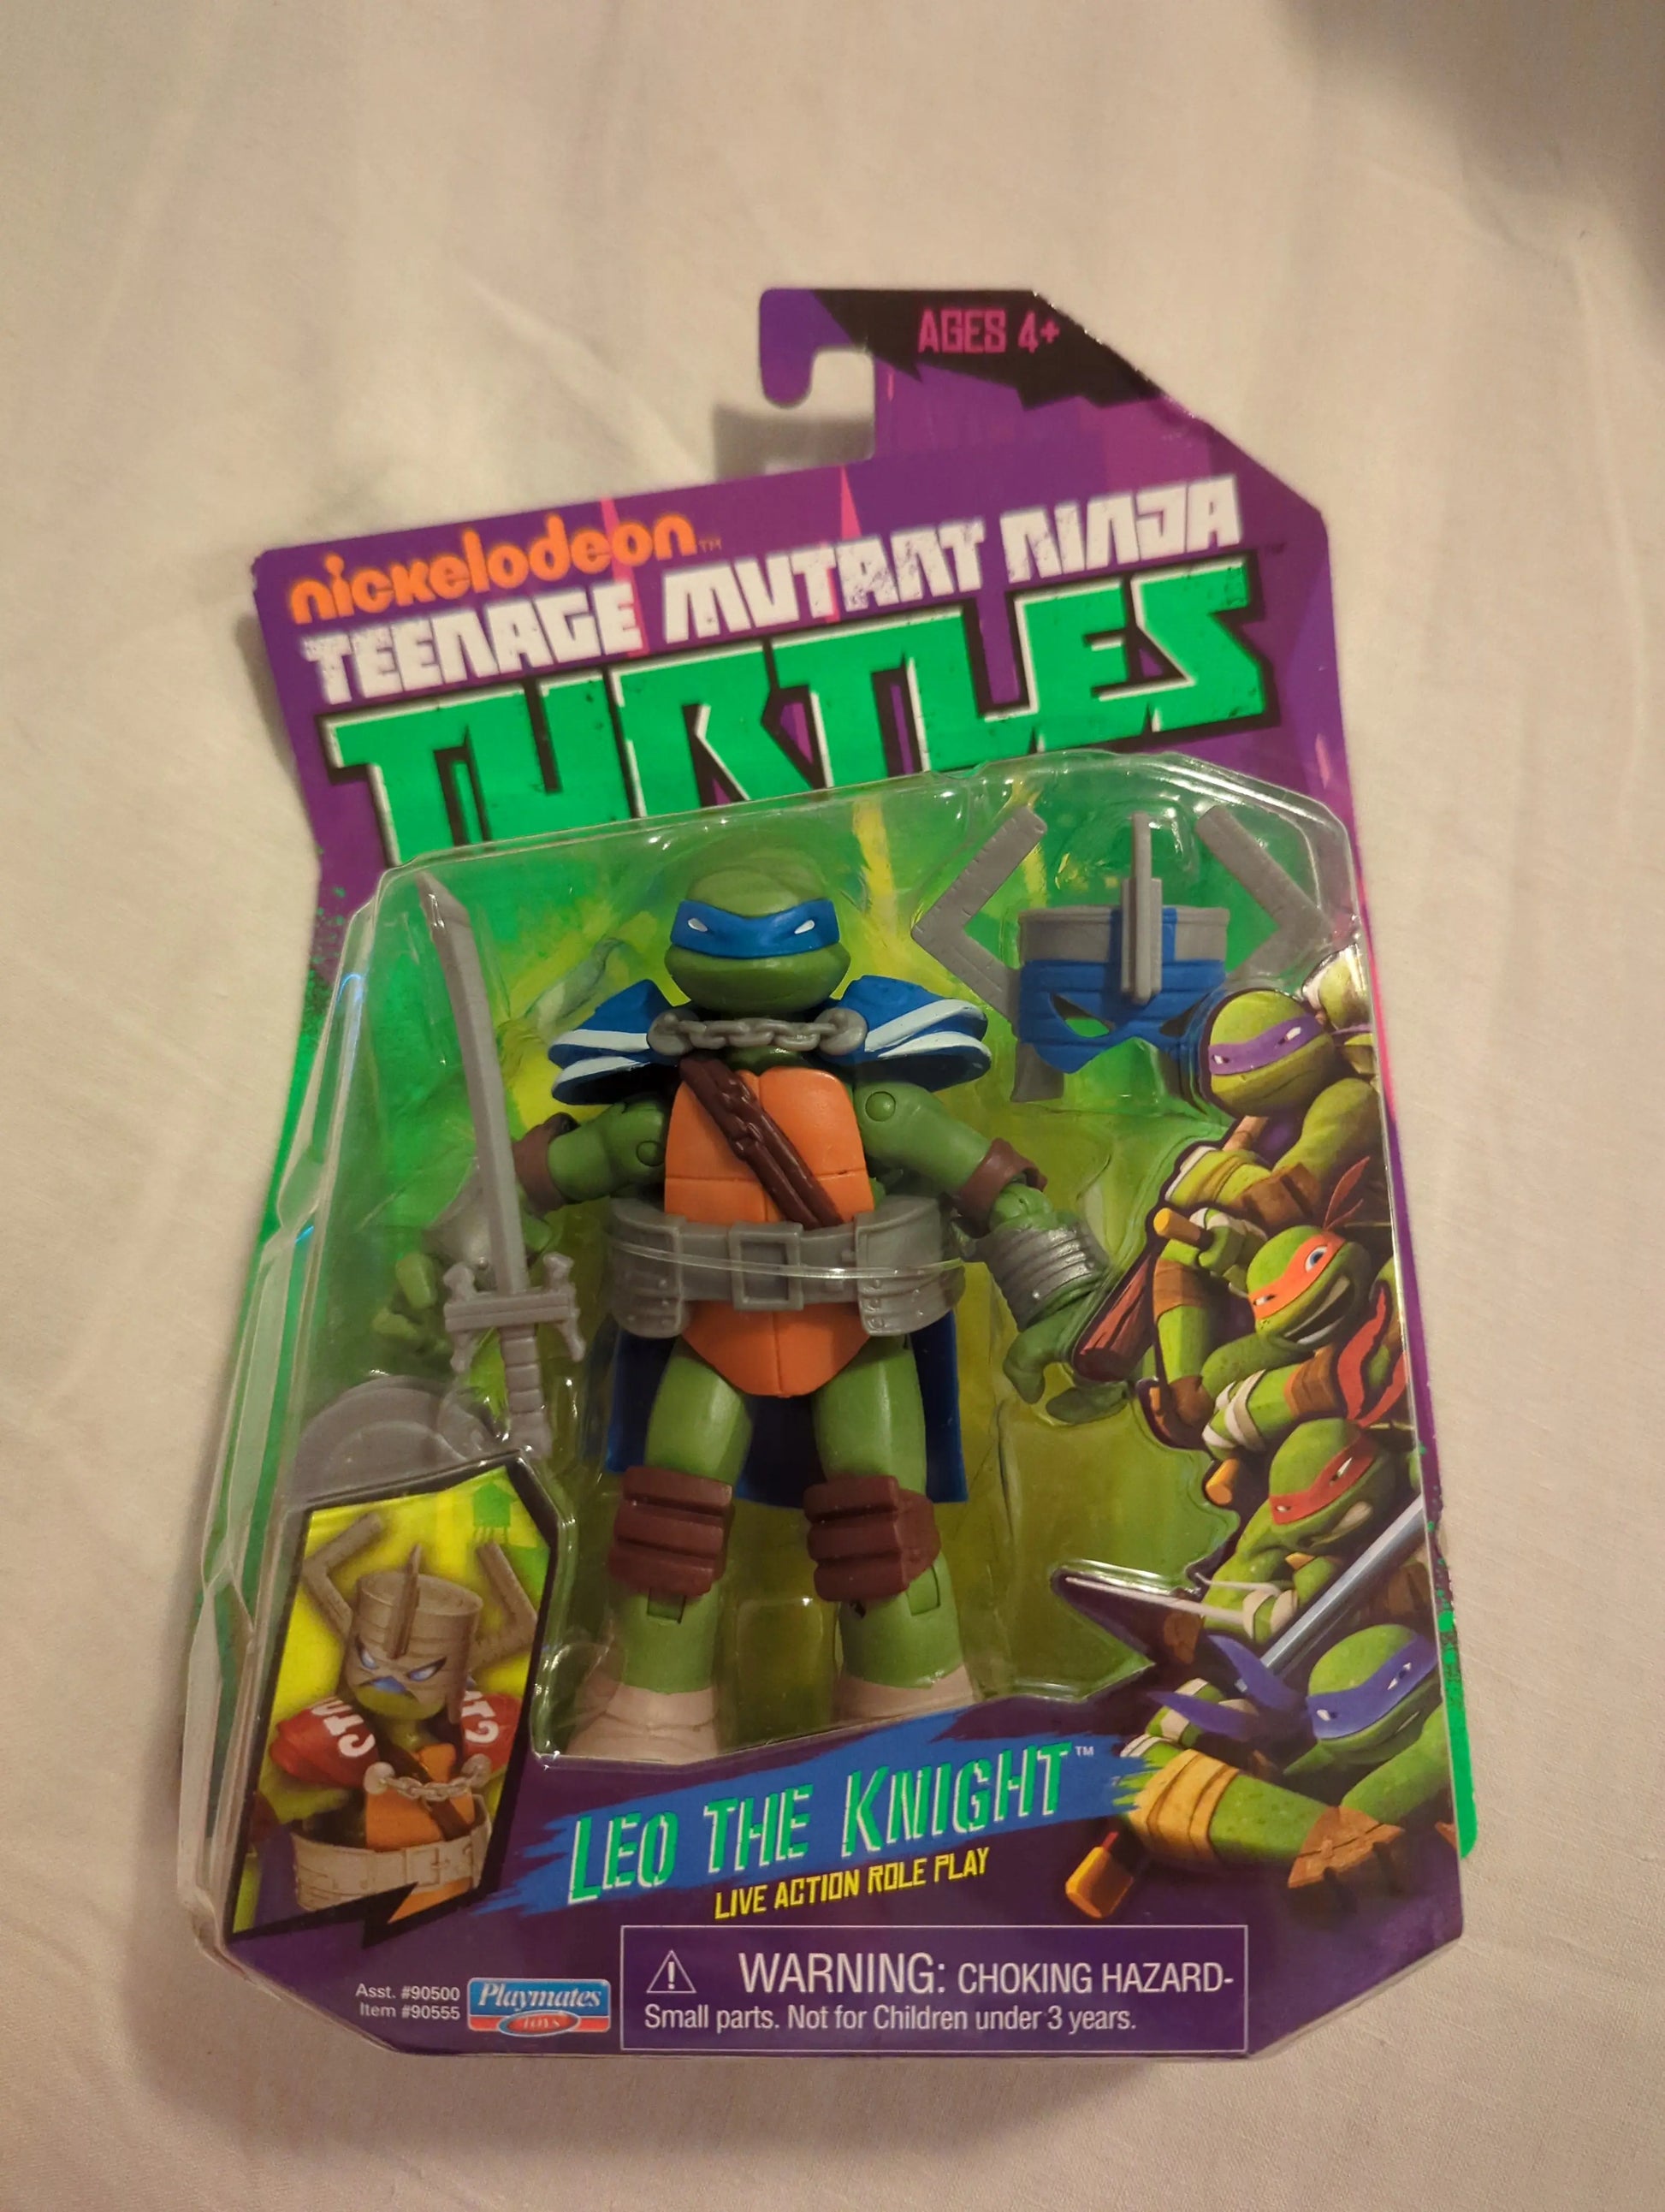 2014 TMNT Nickelodeon Leo The Knight Playmates MOC Action Figure FRENLY BRICKS - Open 7 Days